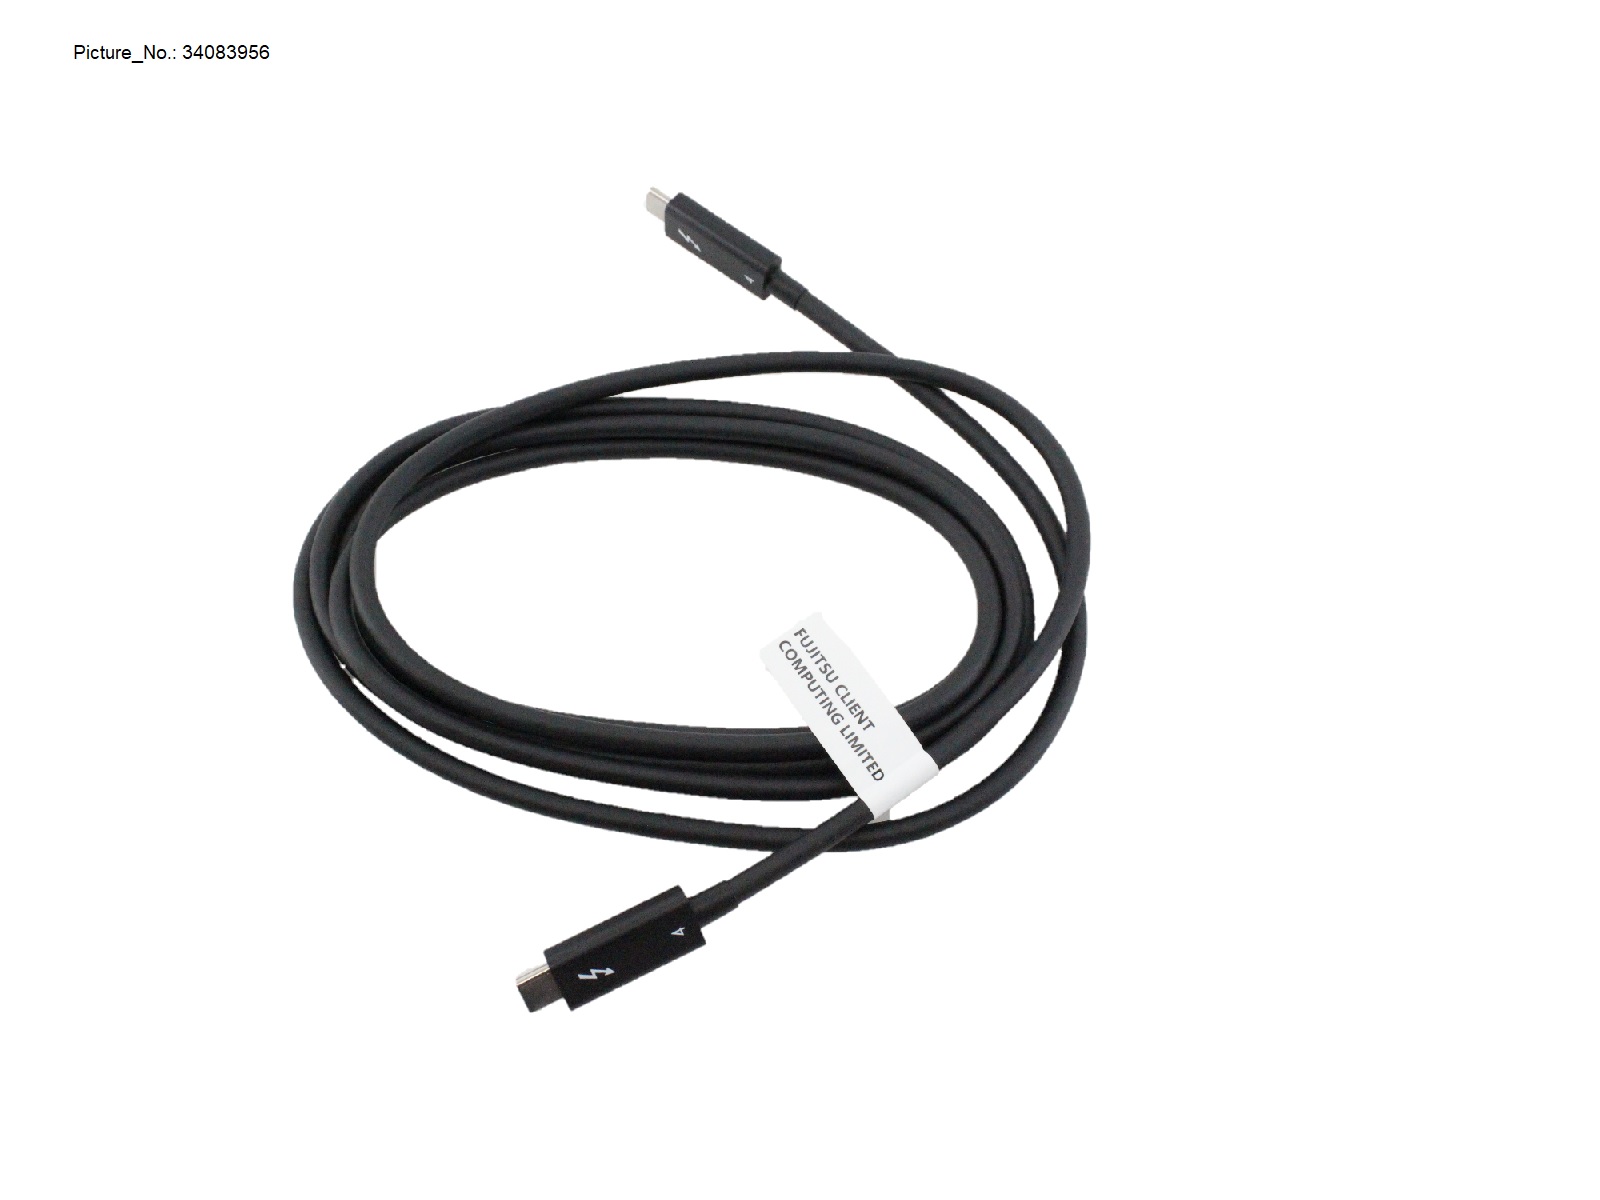 CABLE, THUNDERBOLT 4 (ACTIVE)